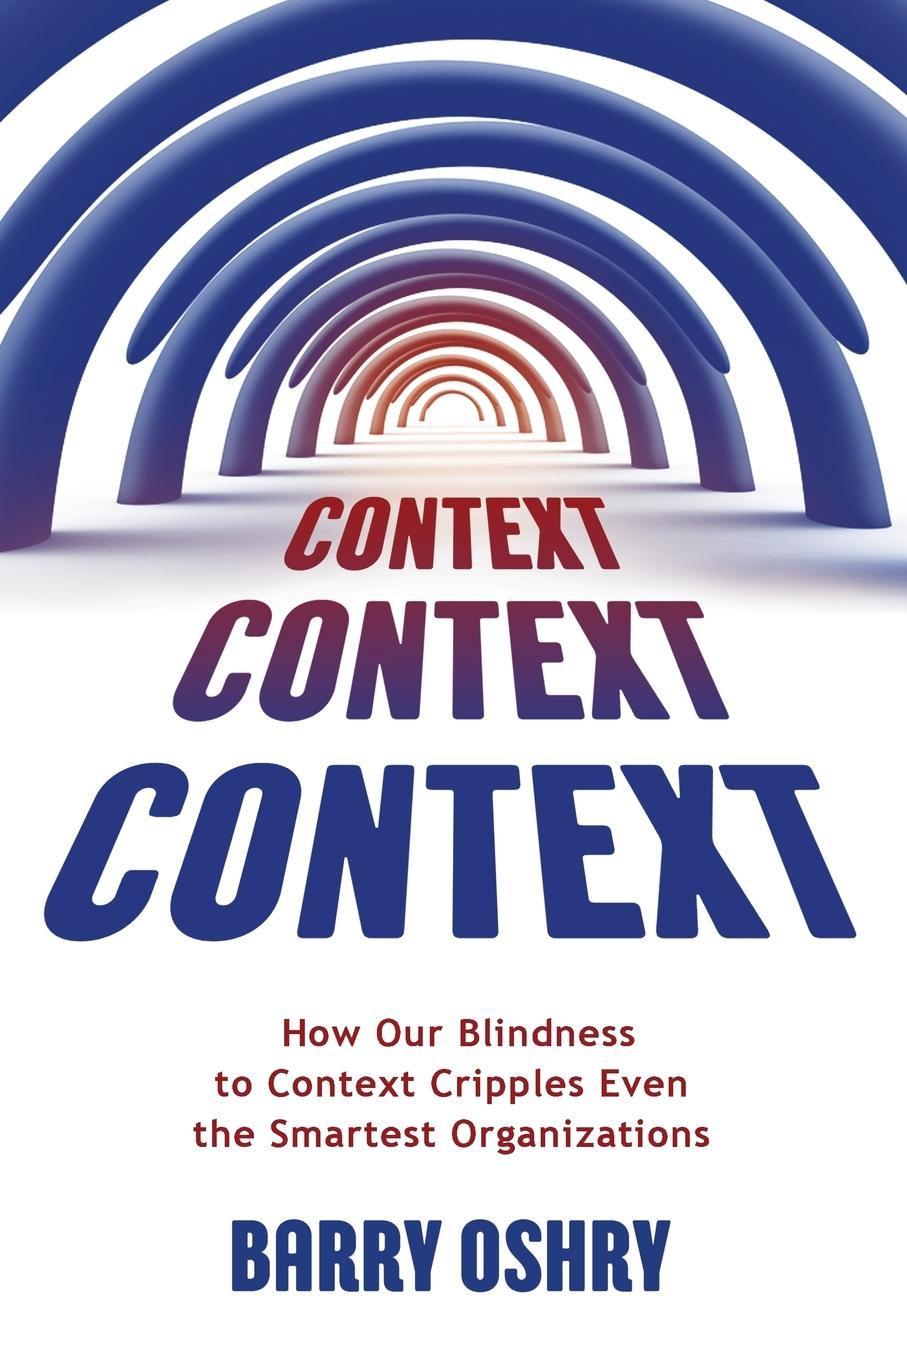 Context, Context, Context: How Our Blindness to Context Cripples Even the Smartest Organizations